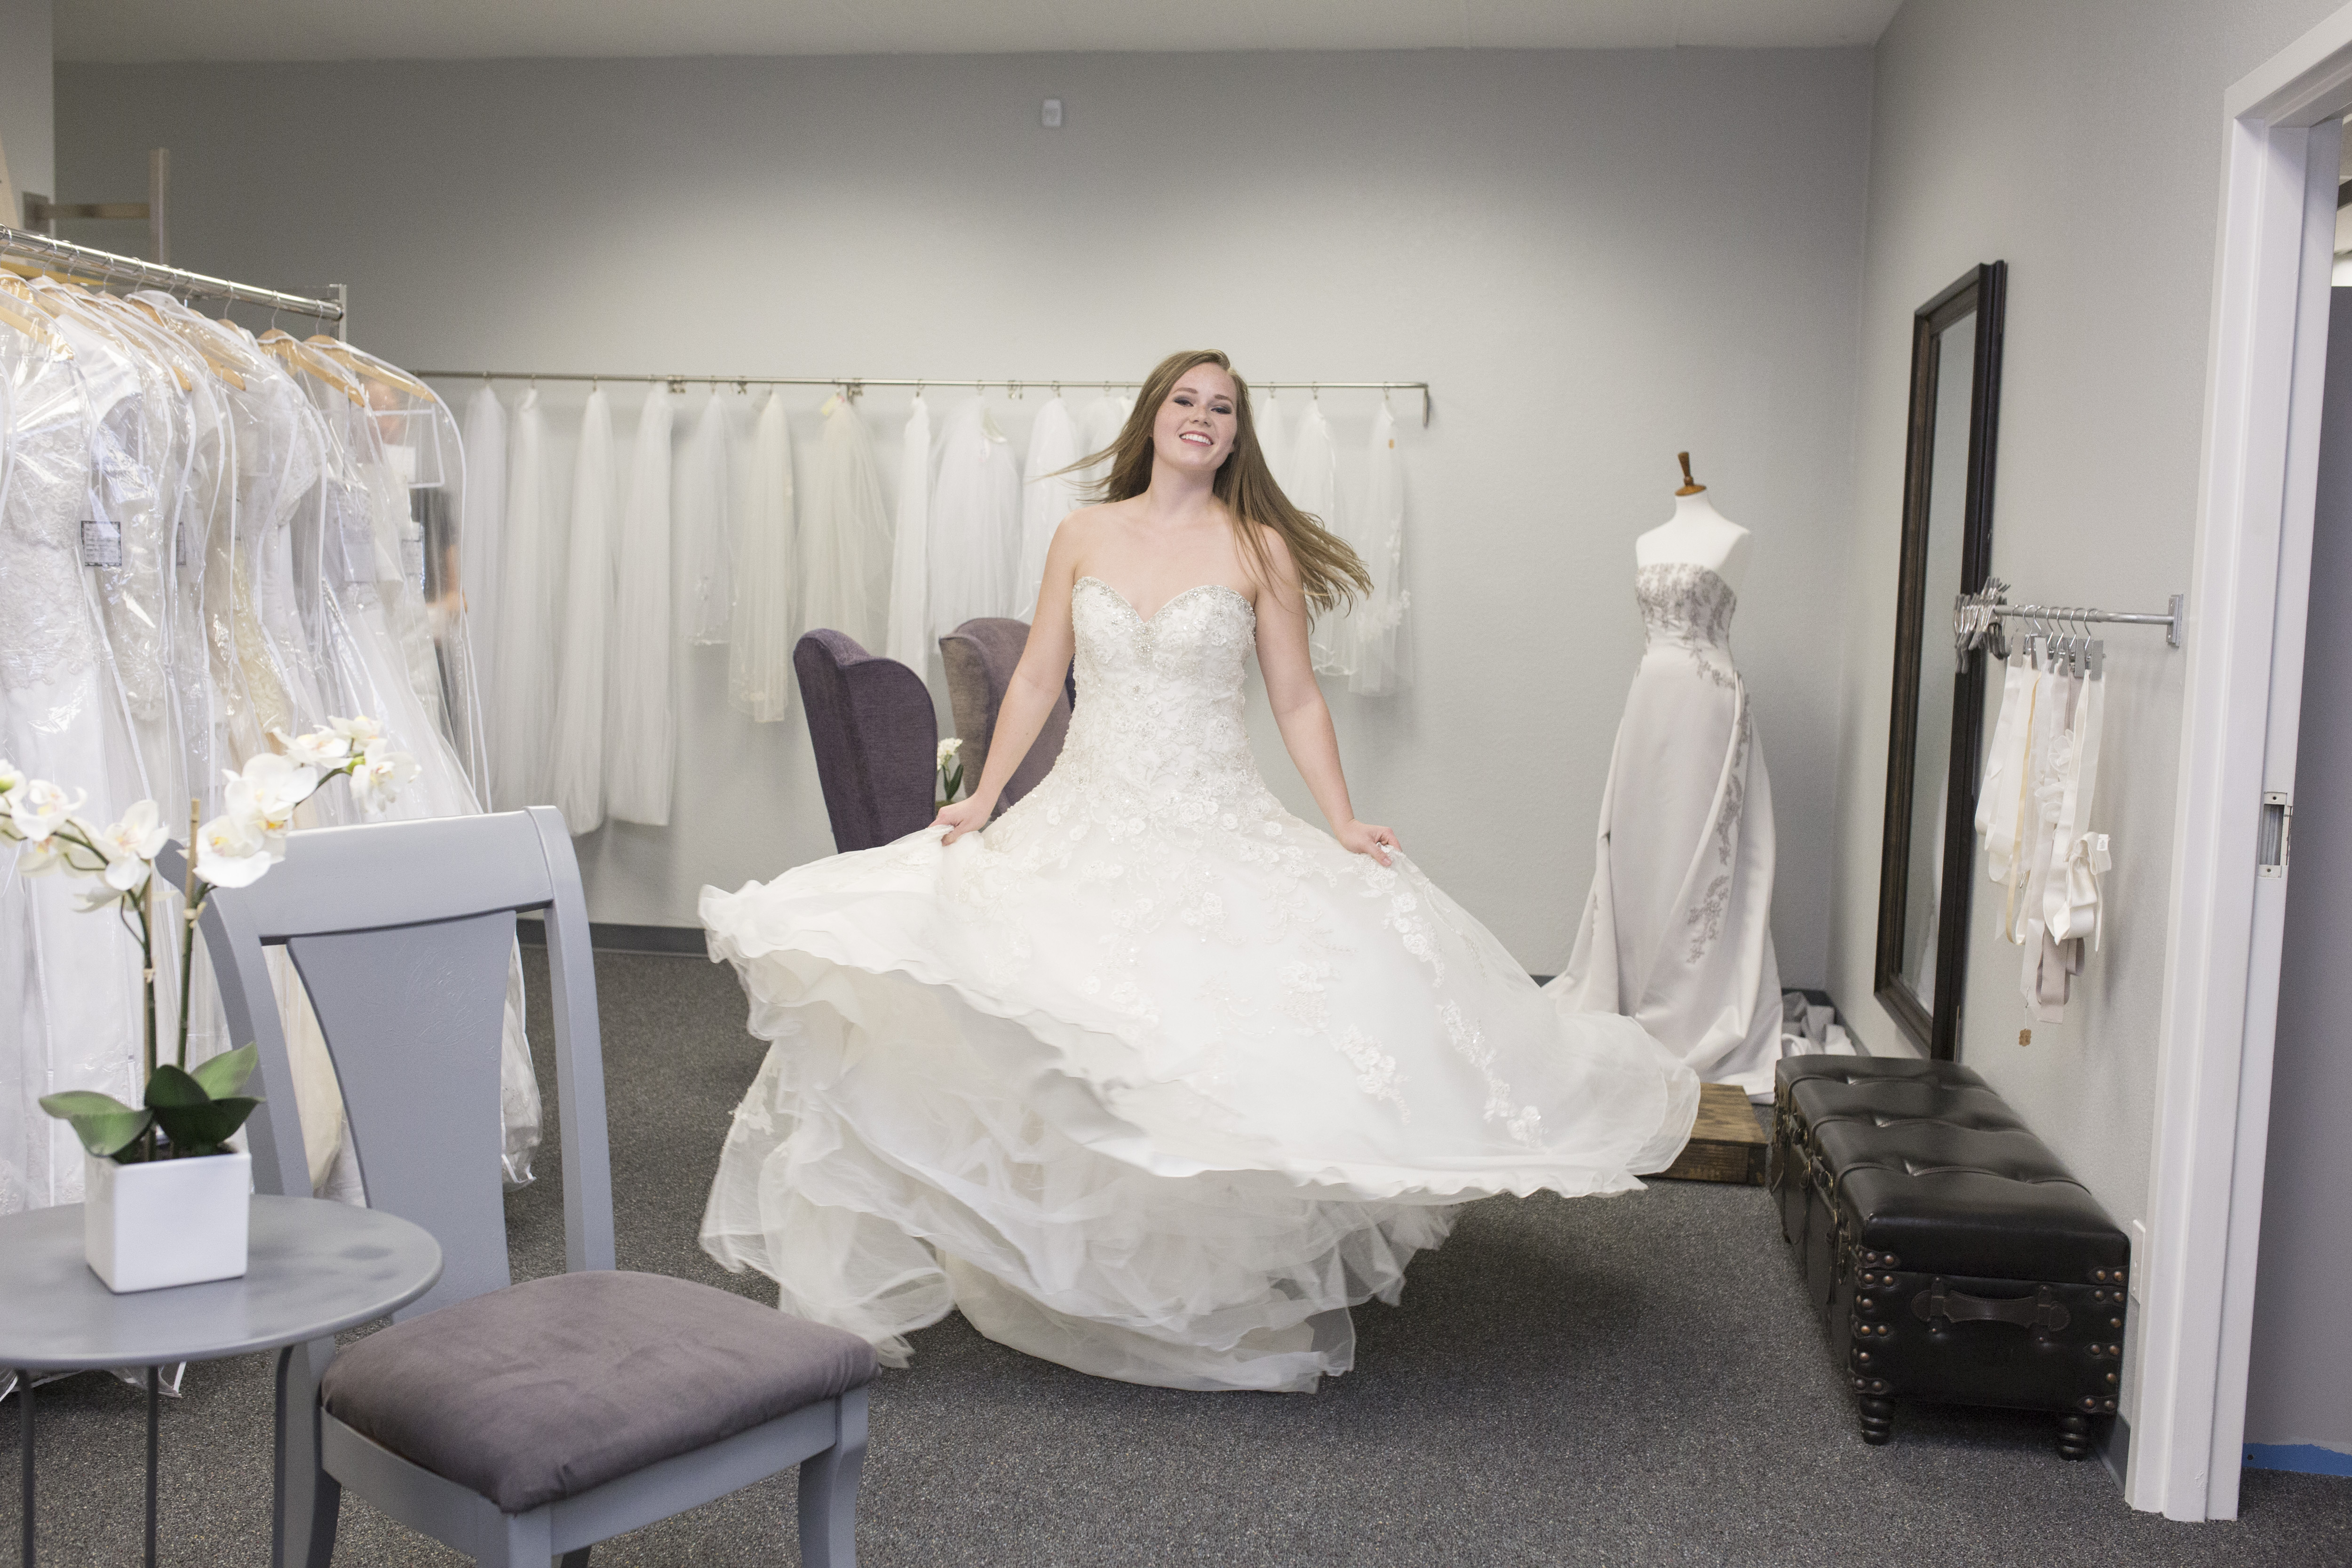 Colorado S Largest Bridal Consignment To Open Second Store 303